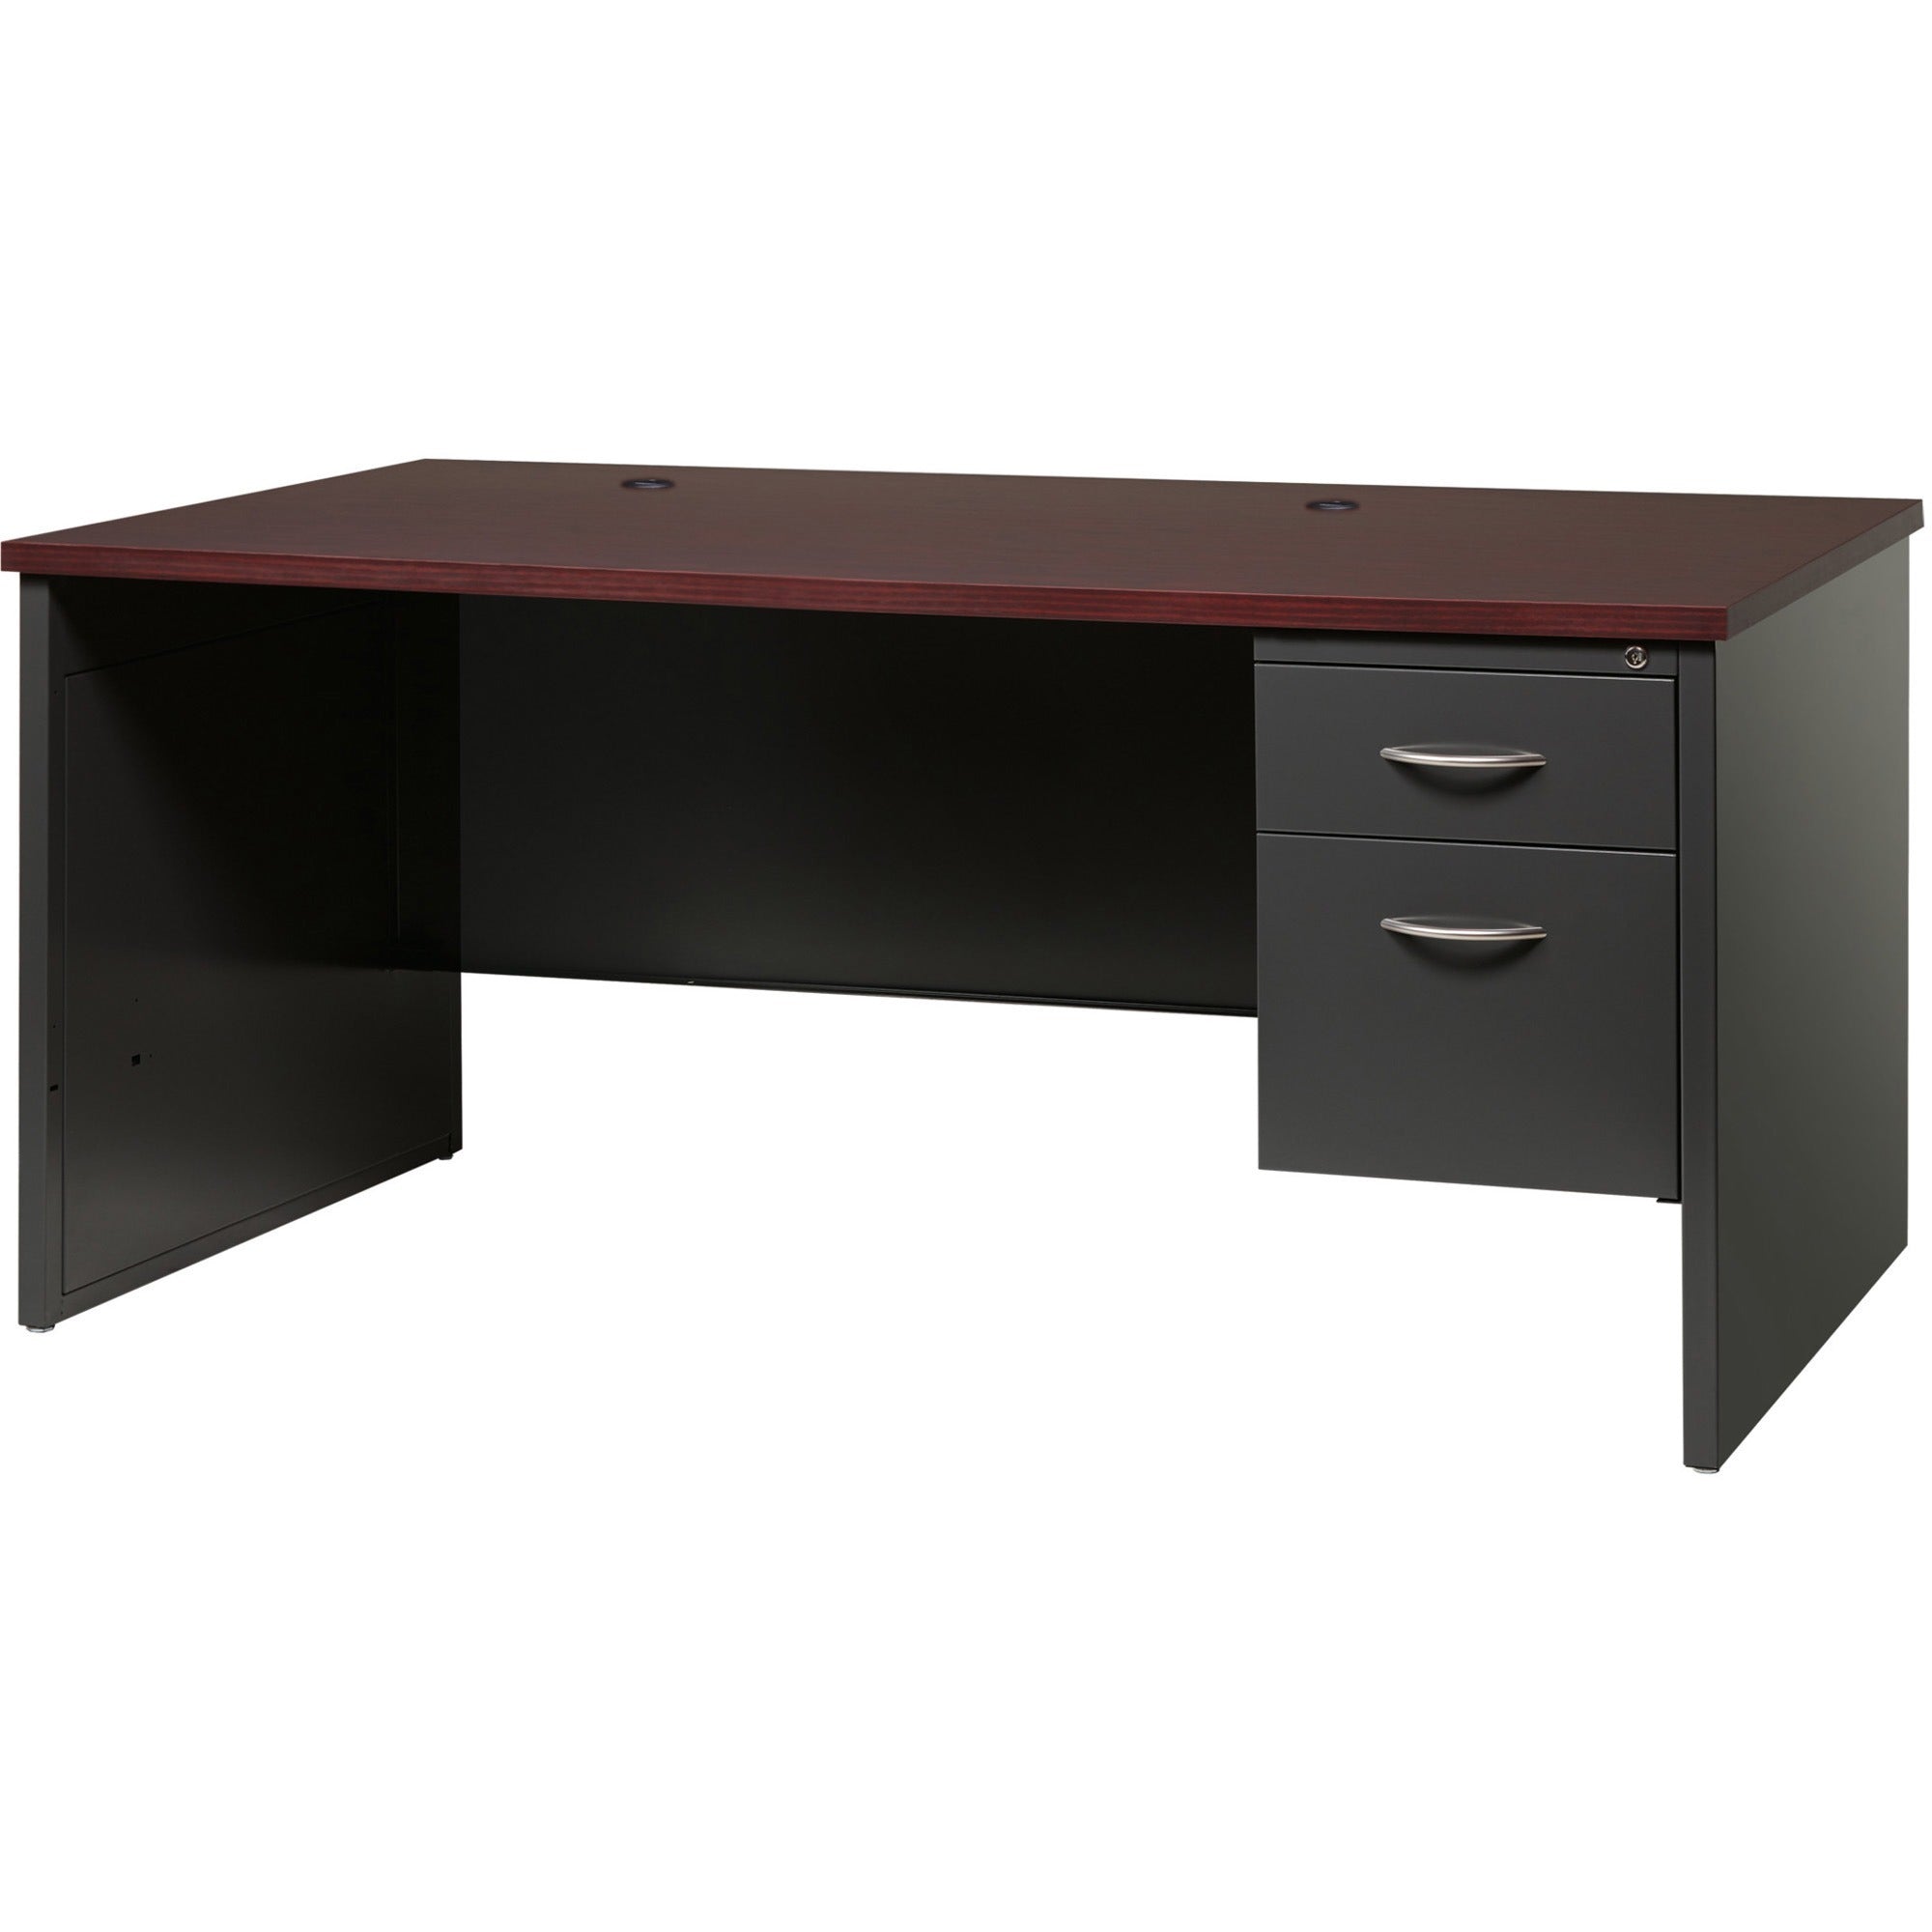 Lorell Fortress Modular Series Right-Pedestal Desk - 66" x 30" , 1.1" Top - 2 x Box, File Drawer(s) - Single Pedestal on Right Side - Material: Steel - Finish: Mahogany Laminate, Charcoal - Scratch Resistant, Stain Resistant, Ball-bearing Suspension, - 